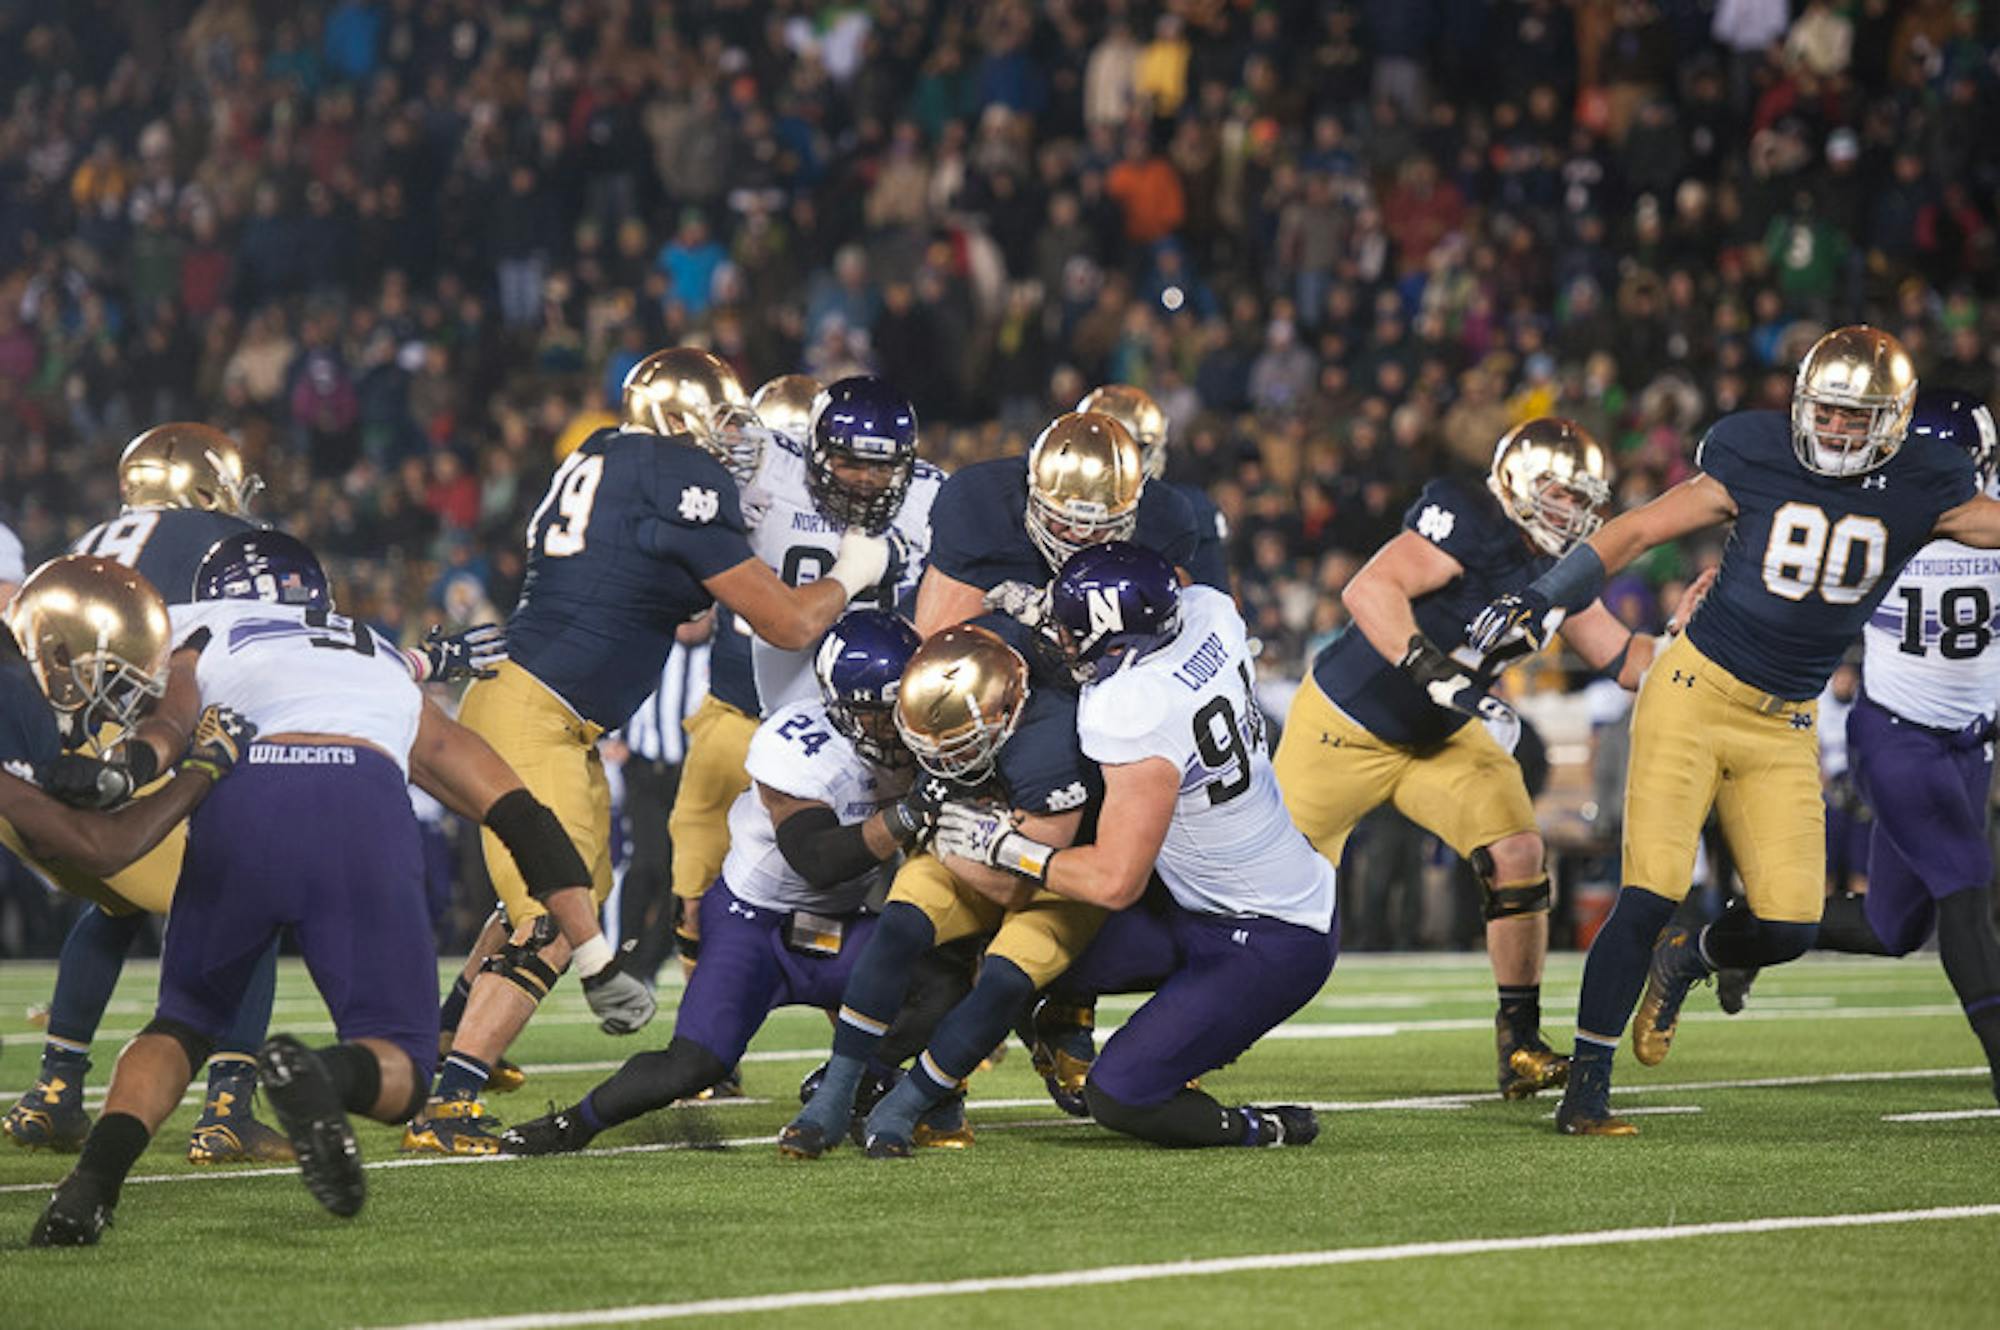 Irish senior running back Cam McDaniel fumbles in the fourth quarter of Northwestern’s 43-40  overtime victory over Notre Dame on Saturday at Notre Dame Stadium.